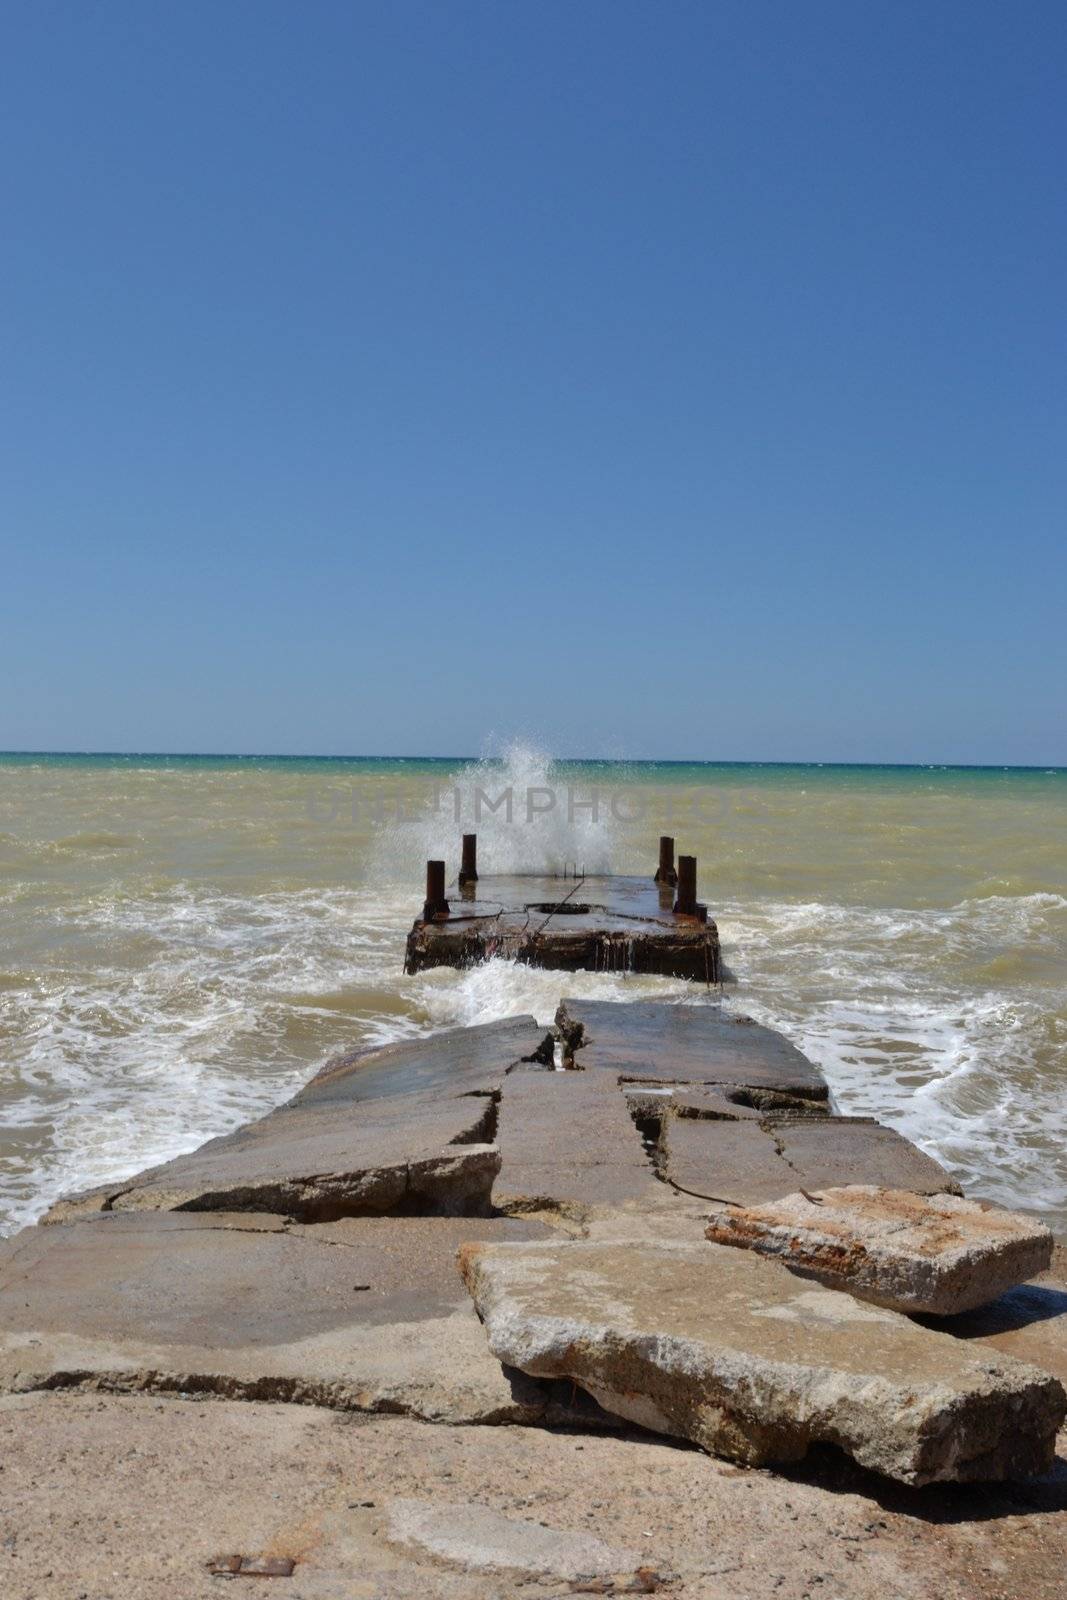 View of the dock and splashing waves